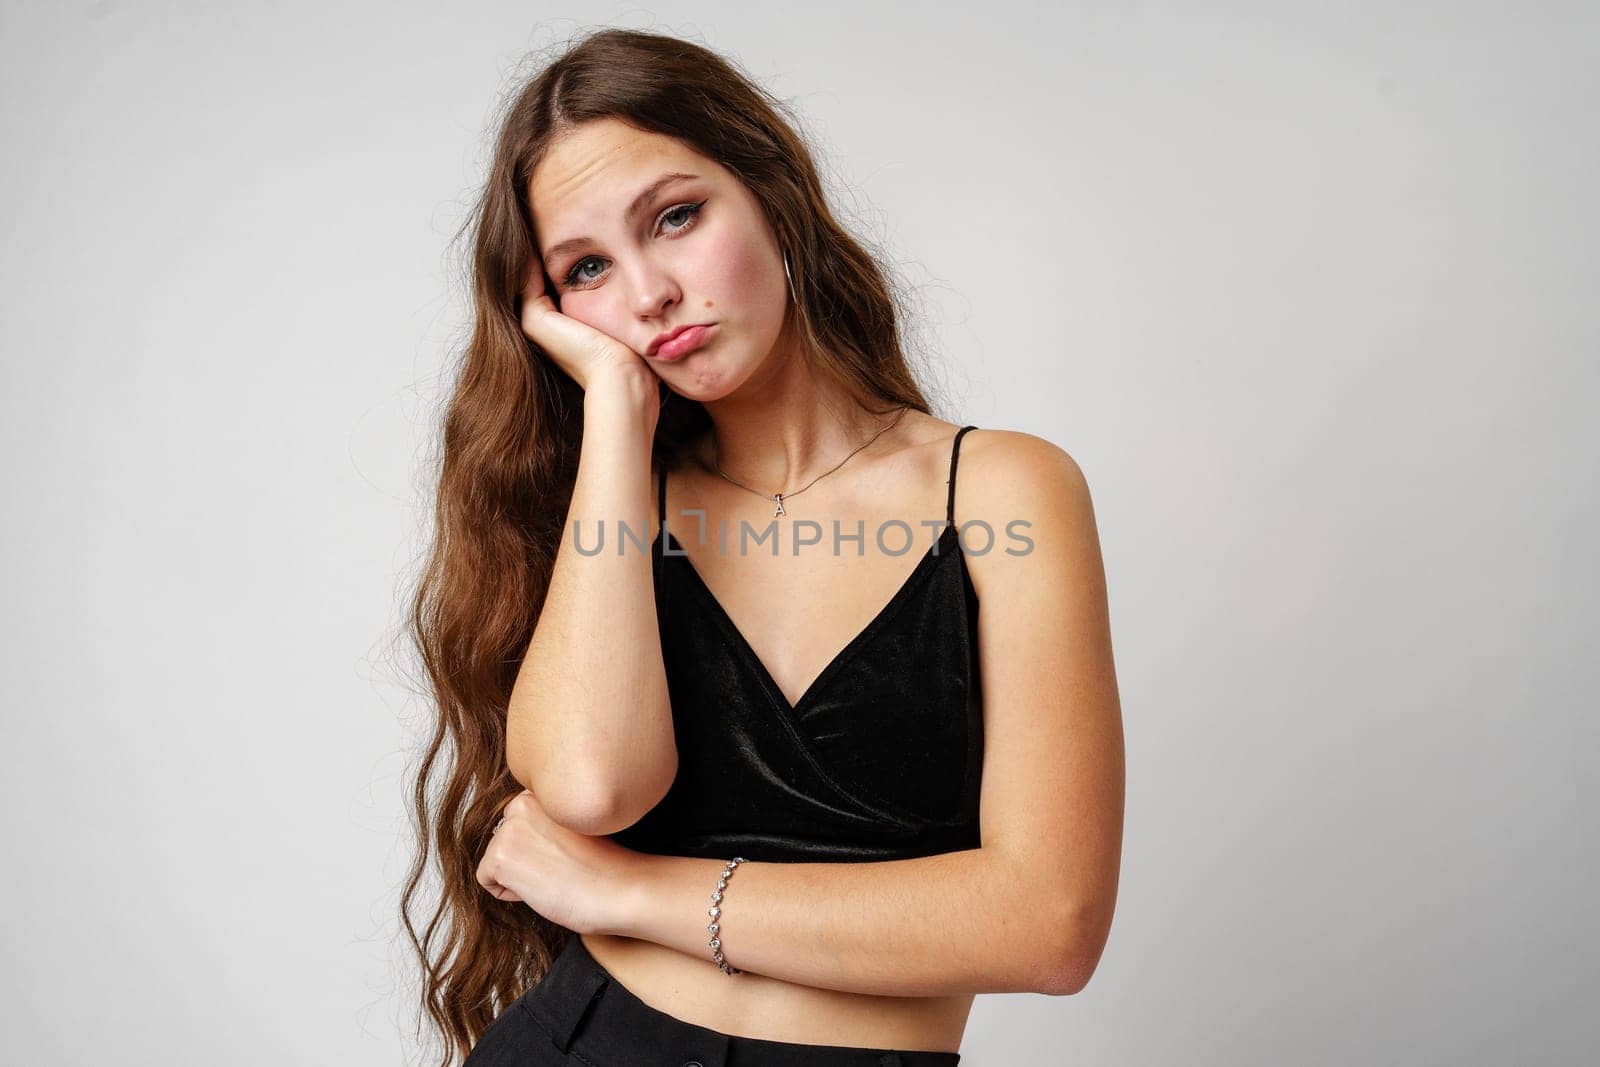 Young Woman Expressing Boredom With Hand on Face Against Neutral Background by Fabrikasimf